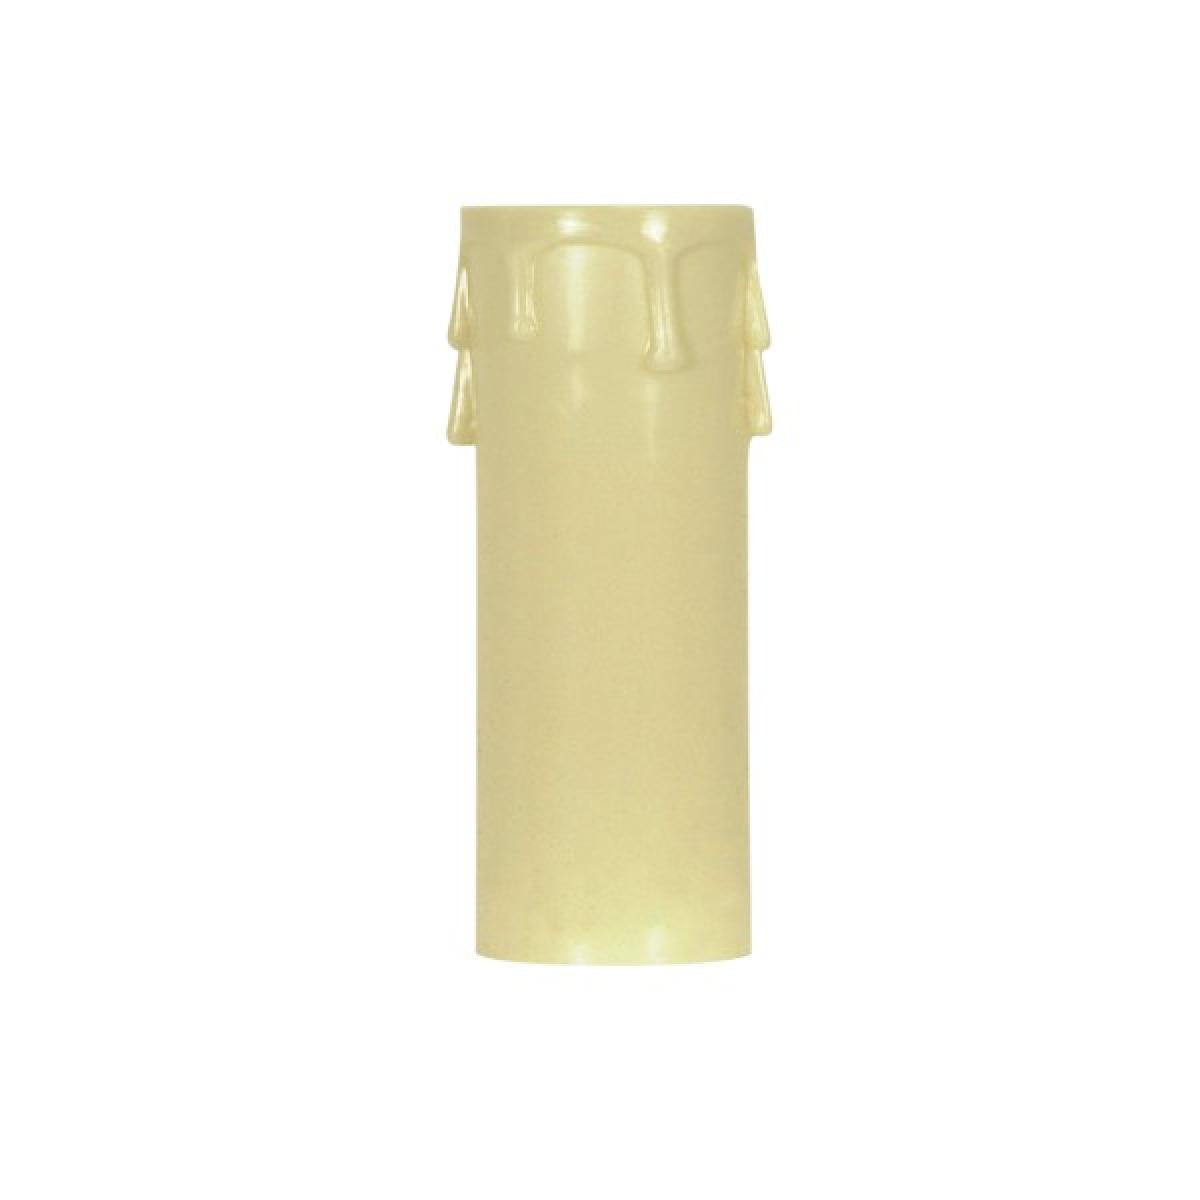 Satco 90-1517 Plastic Drip Candle Cover Ivory Plastic Drip 1-13/16" Inside Diameter 1-1/4" Outside Diameter 4" Height